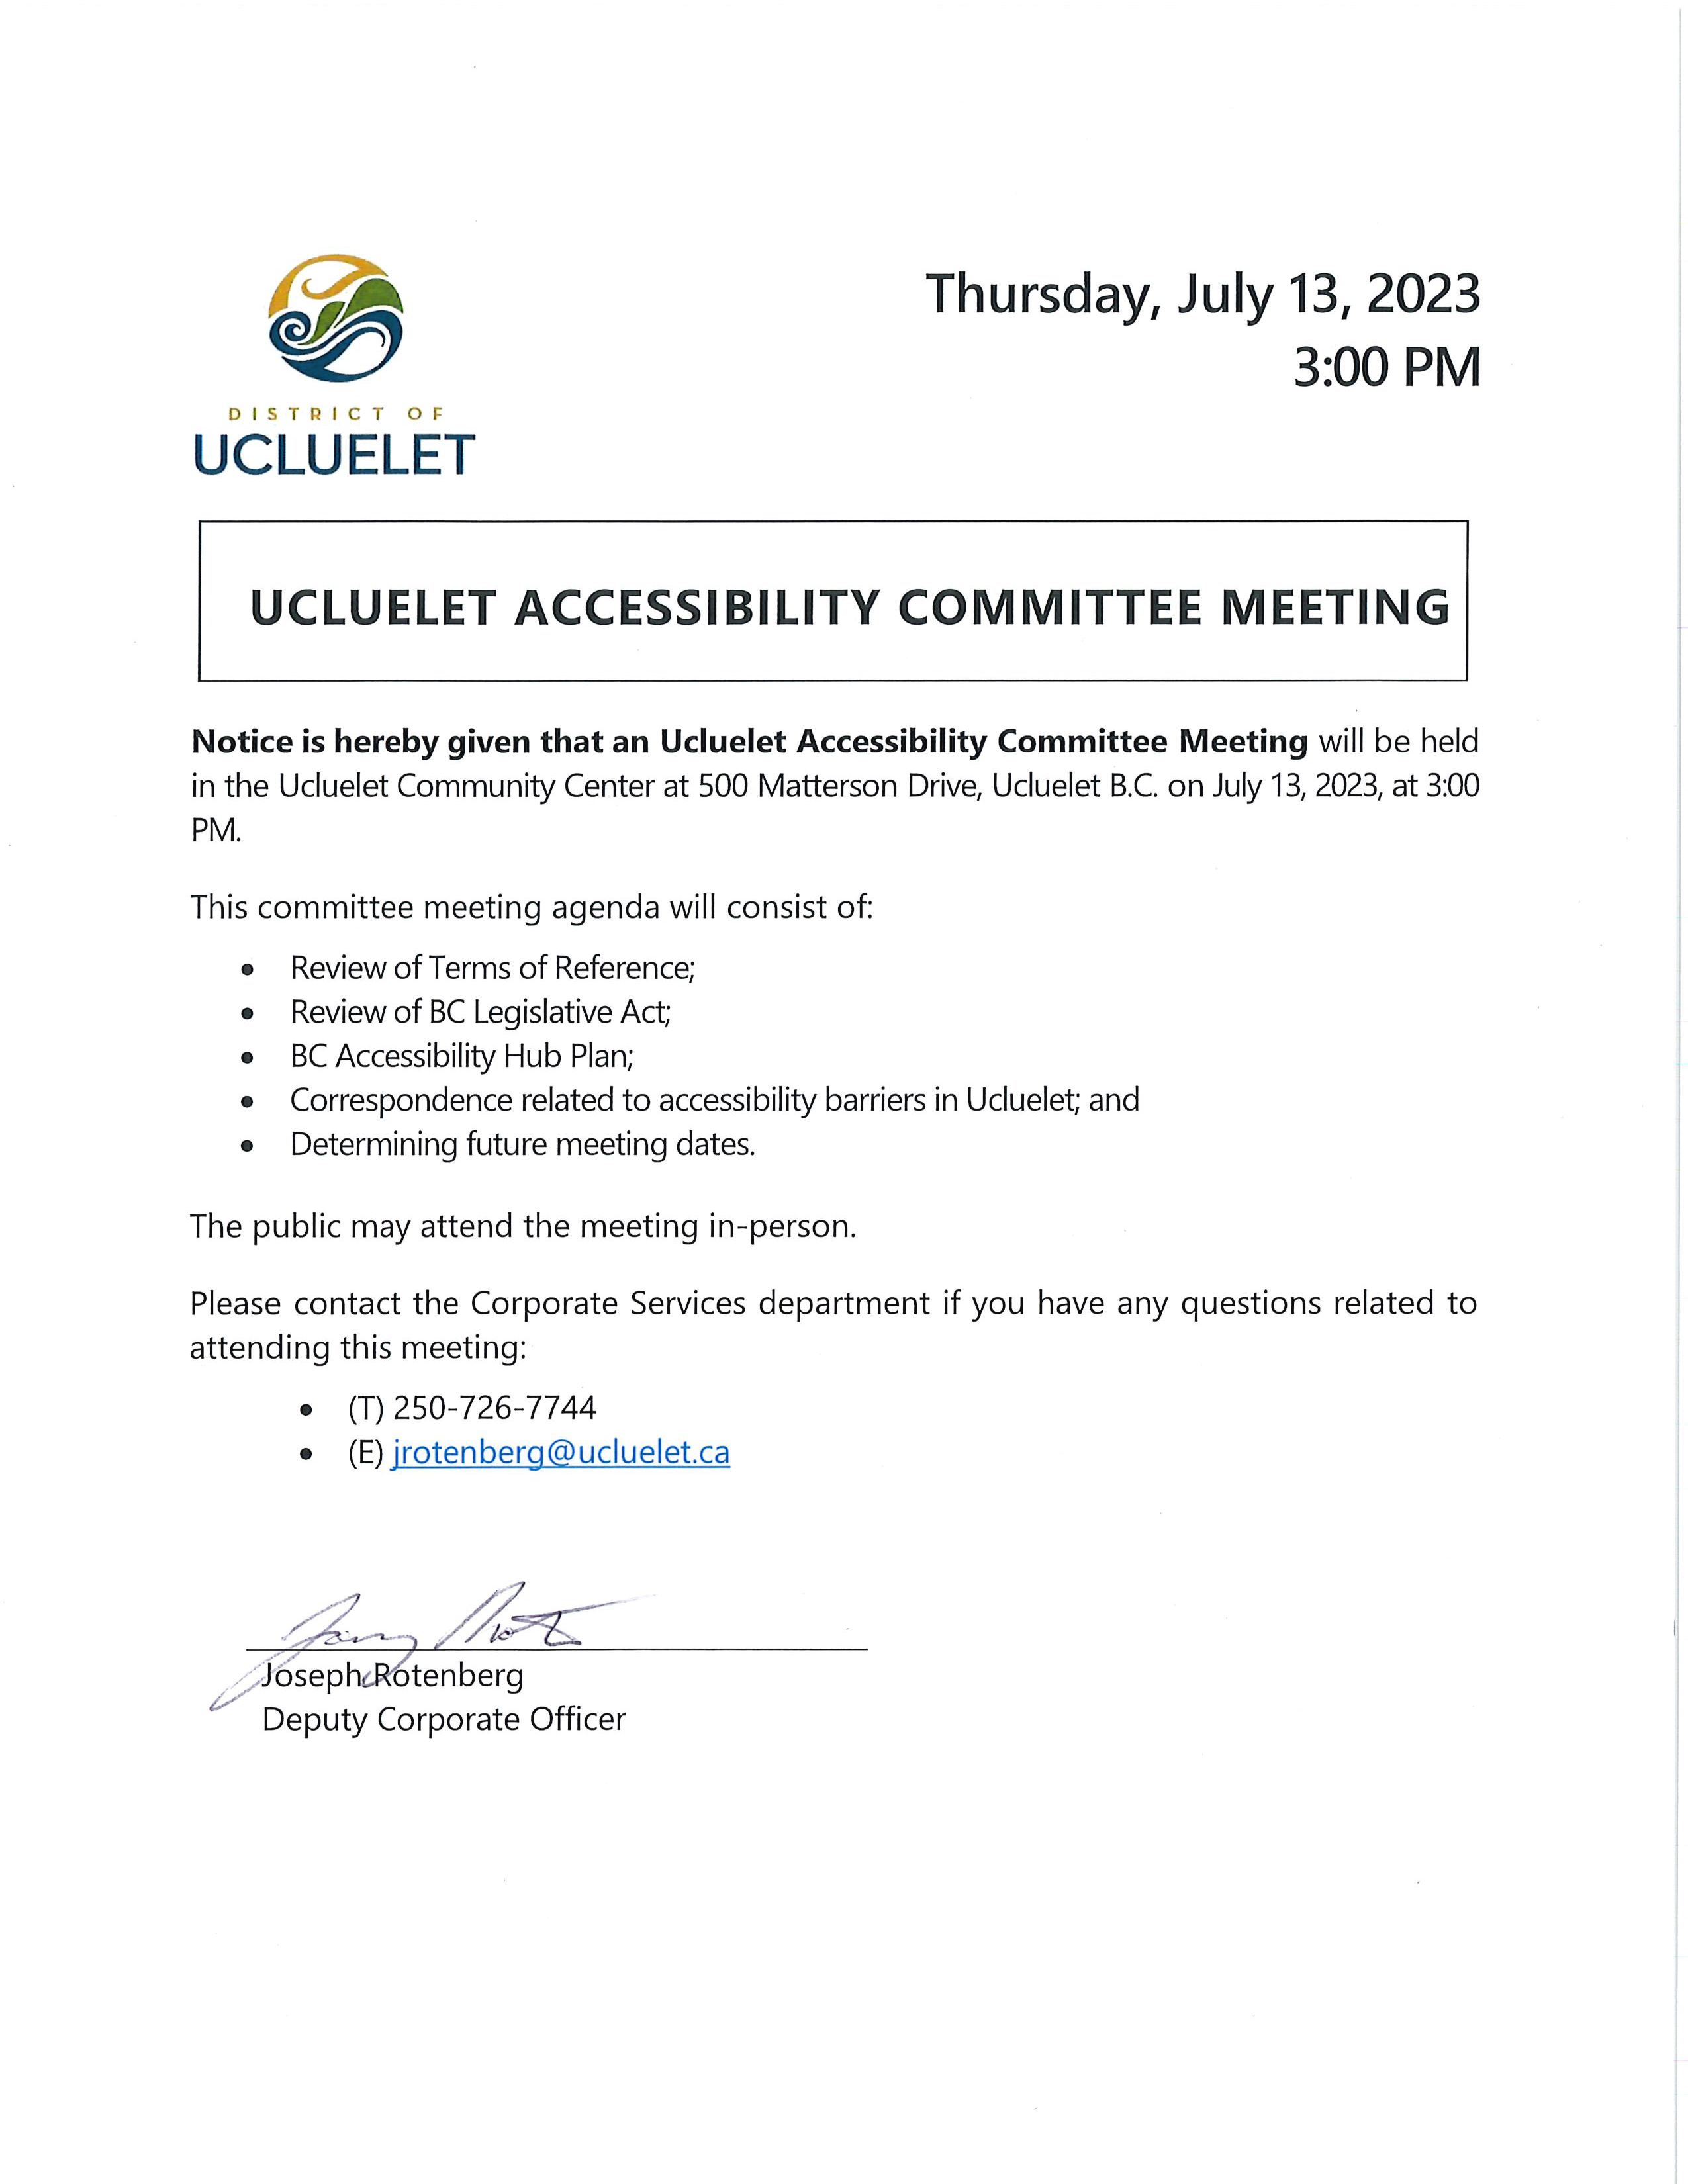 2023-07-13_Accessibility_Meeting_Notice.png